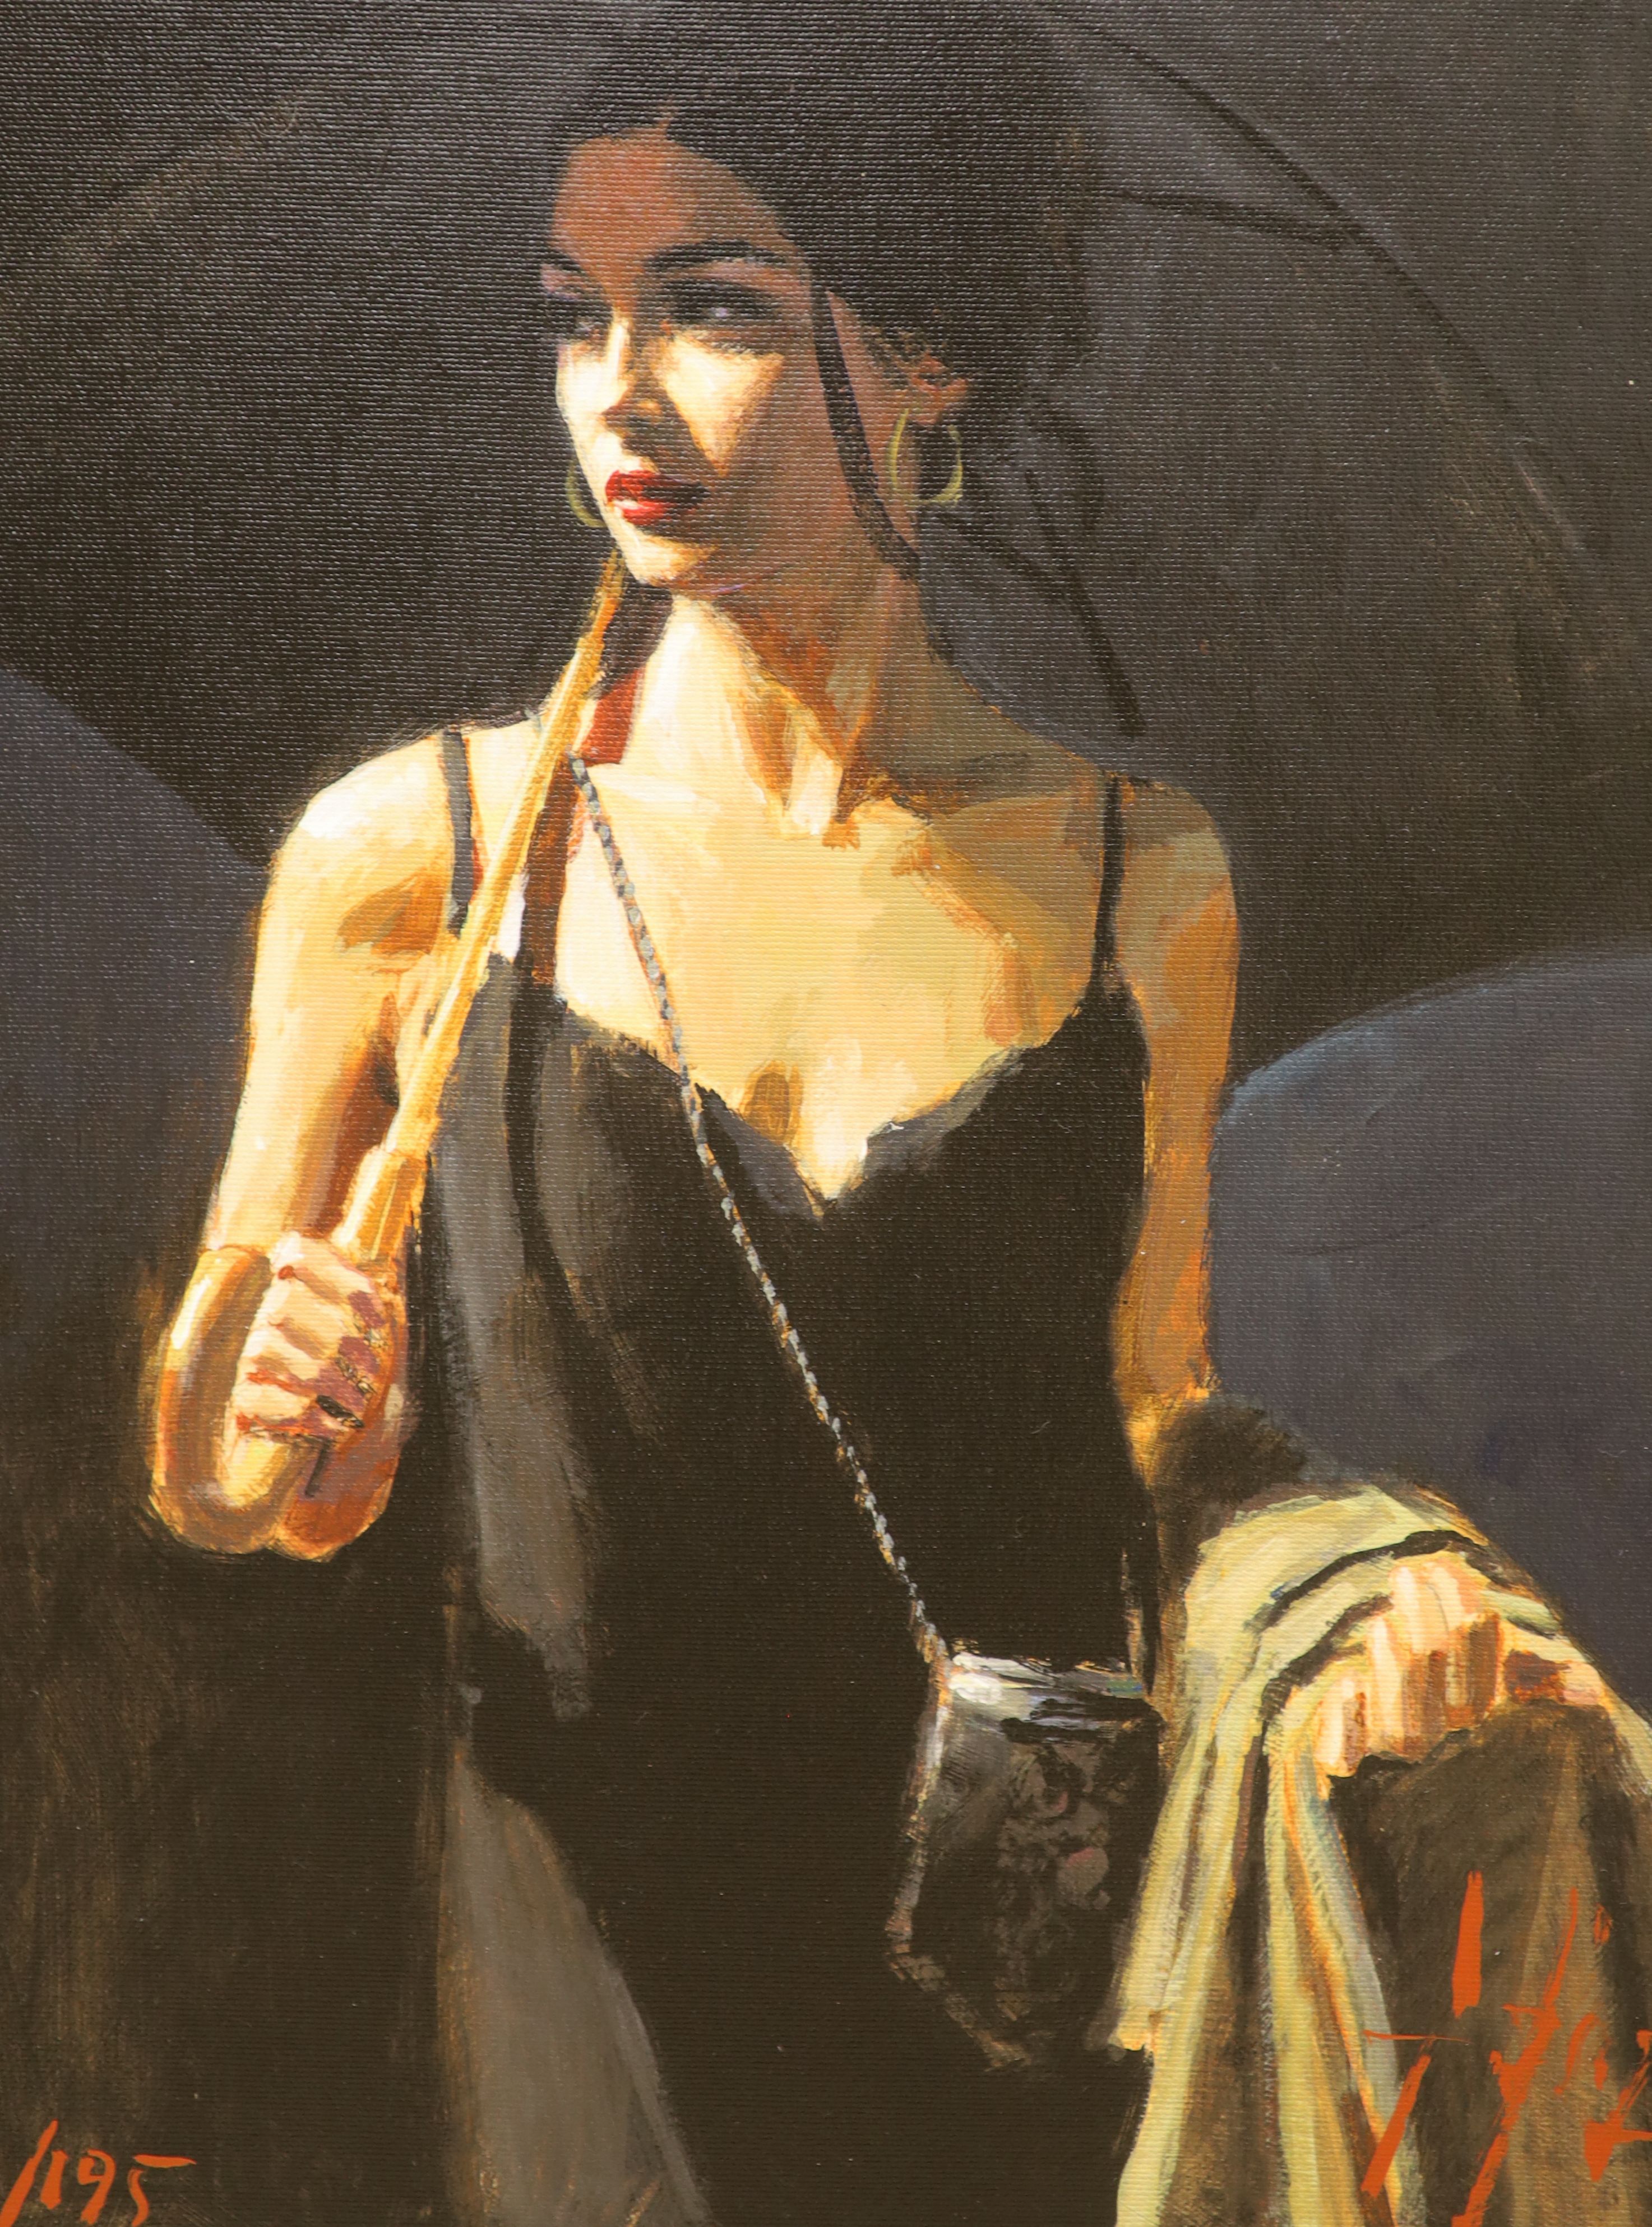 Fabian Perez, two hand embellished giclee canvases, Night Walk IV, 3/195 and Saba on the Stairs, ap 1/20, both with COA